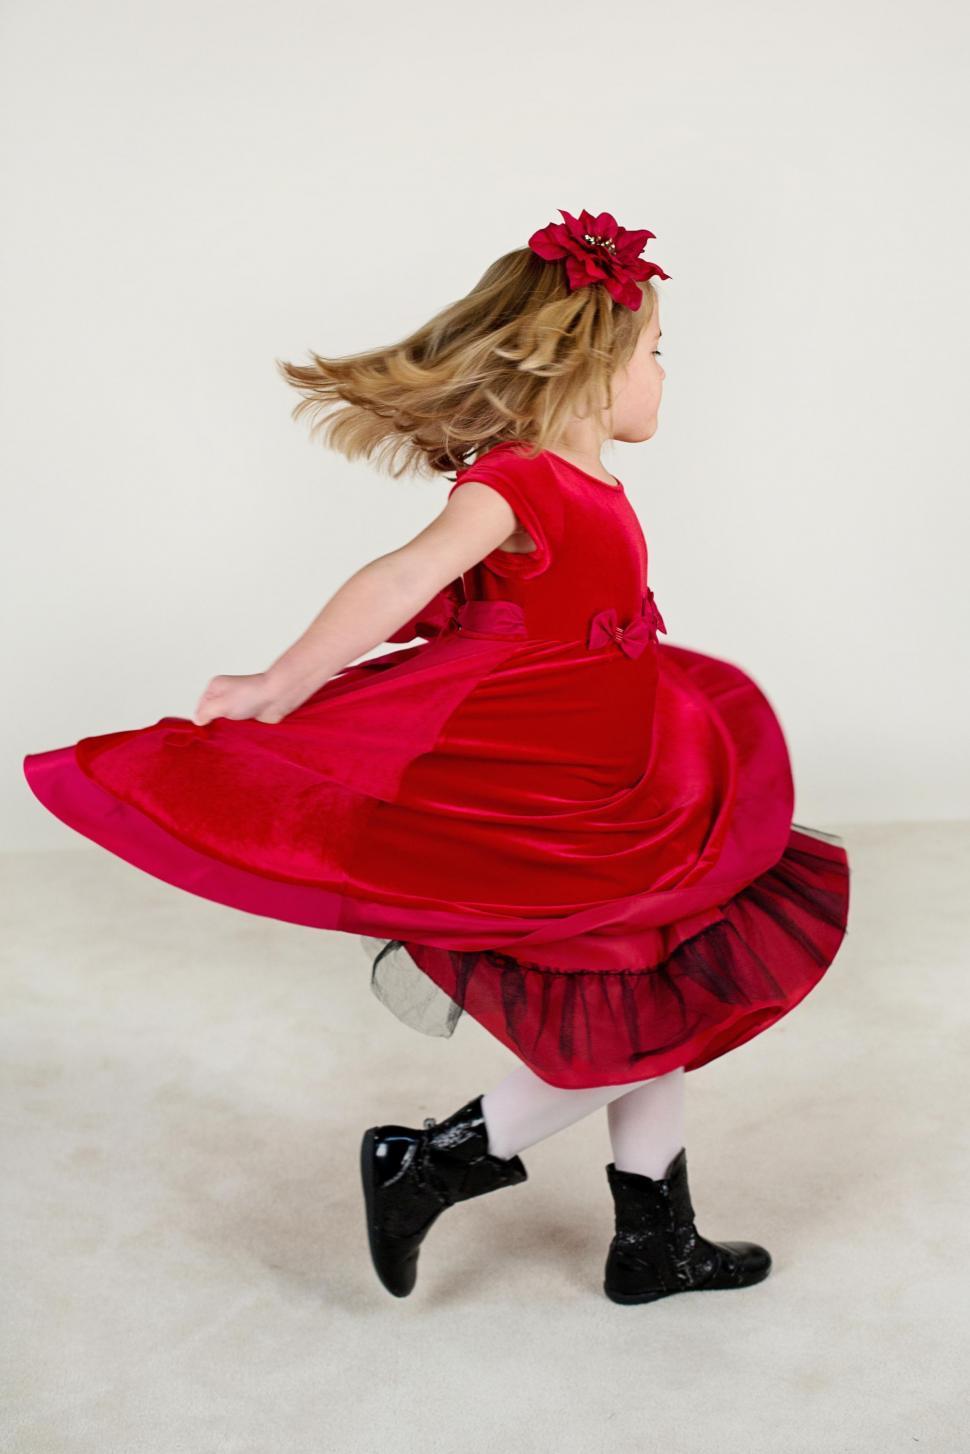 Free Image of Little Girl in Red Dress  